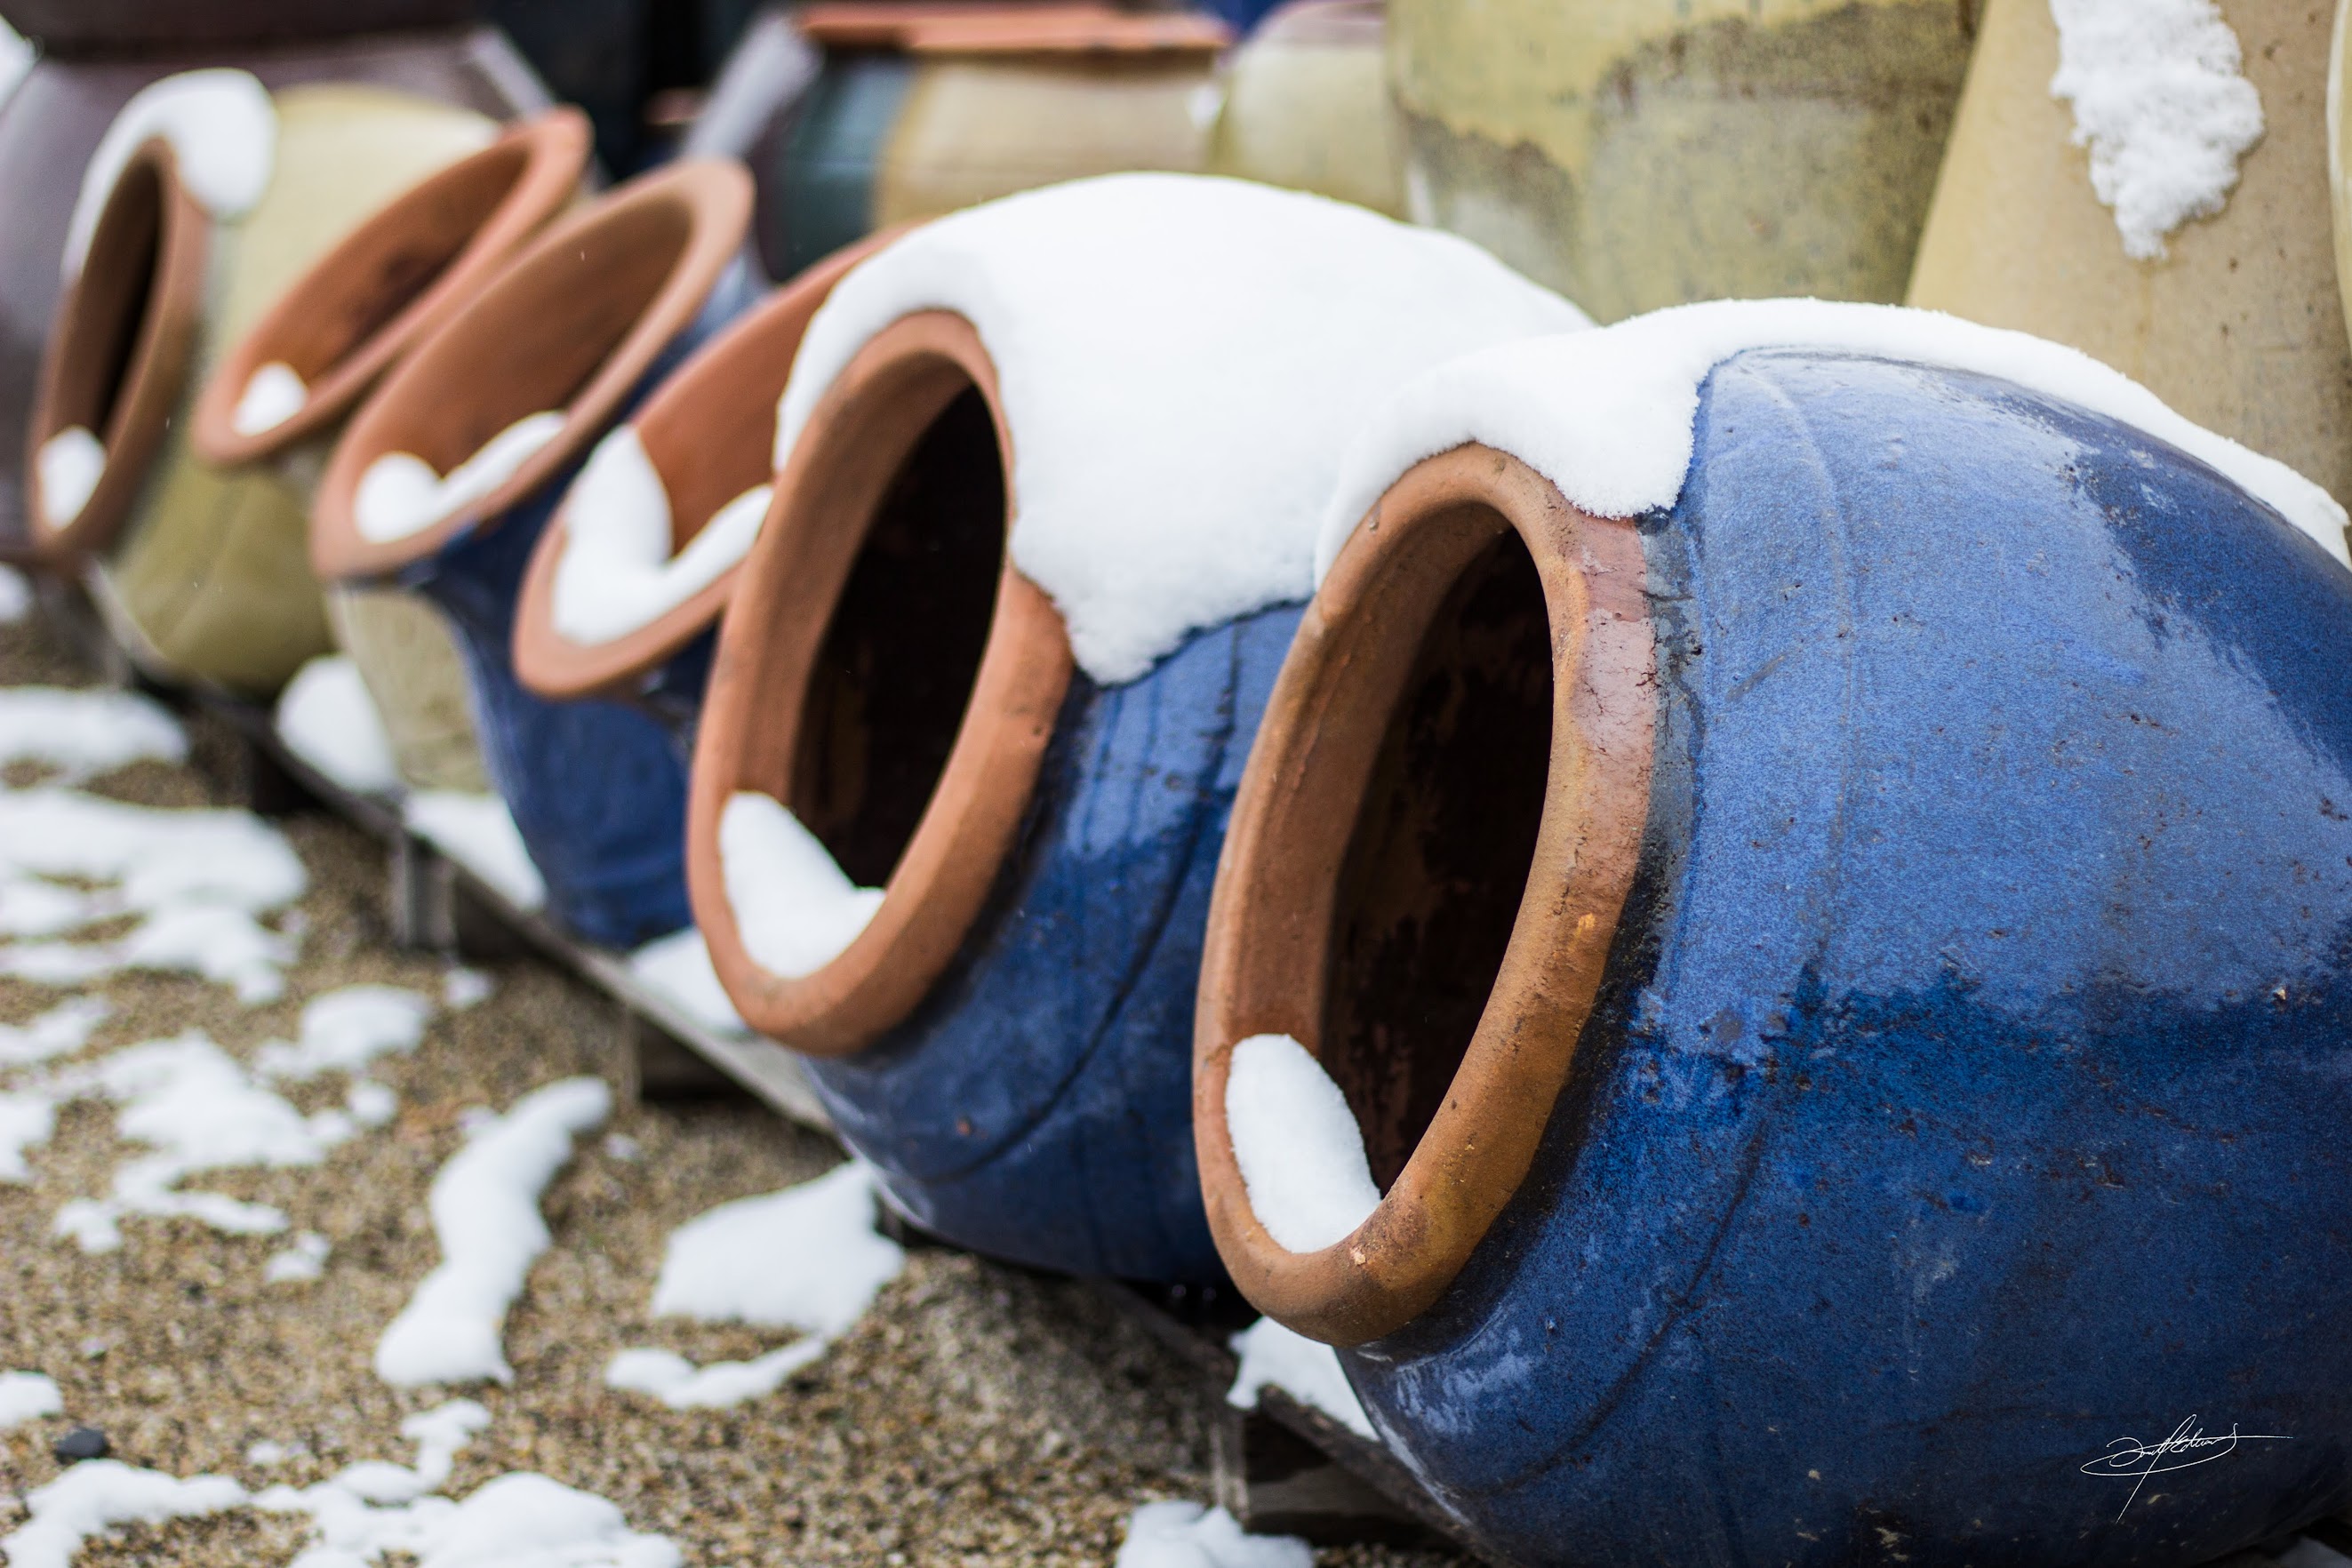 small ceramic pottery with snow on top at botanicals sandy